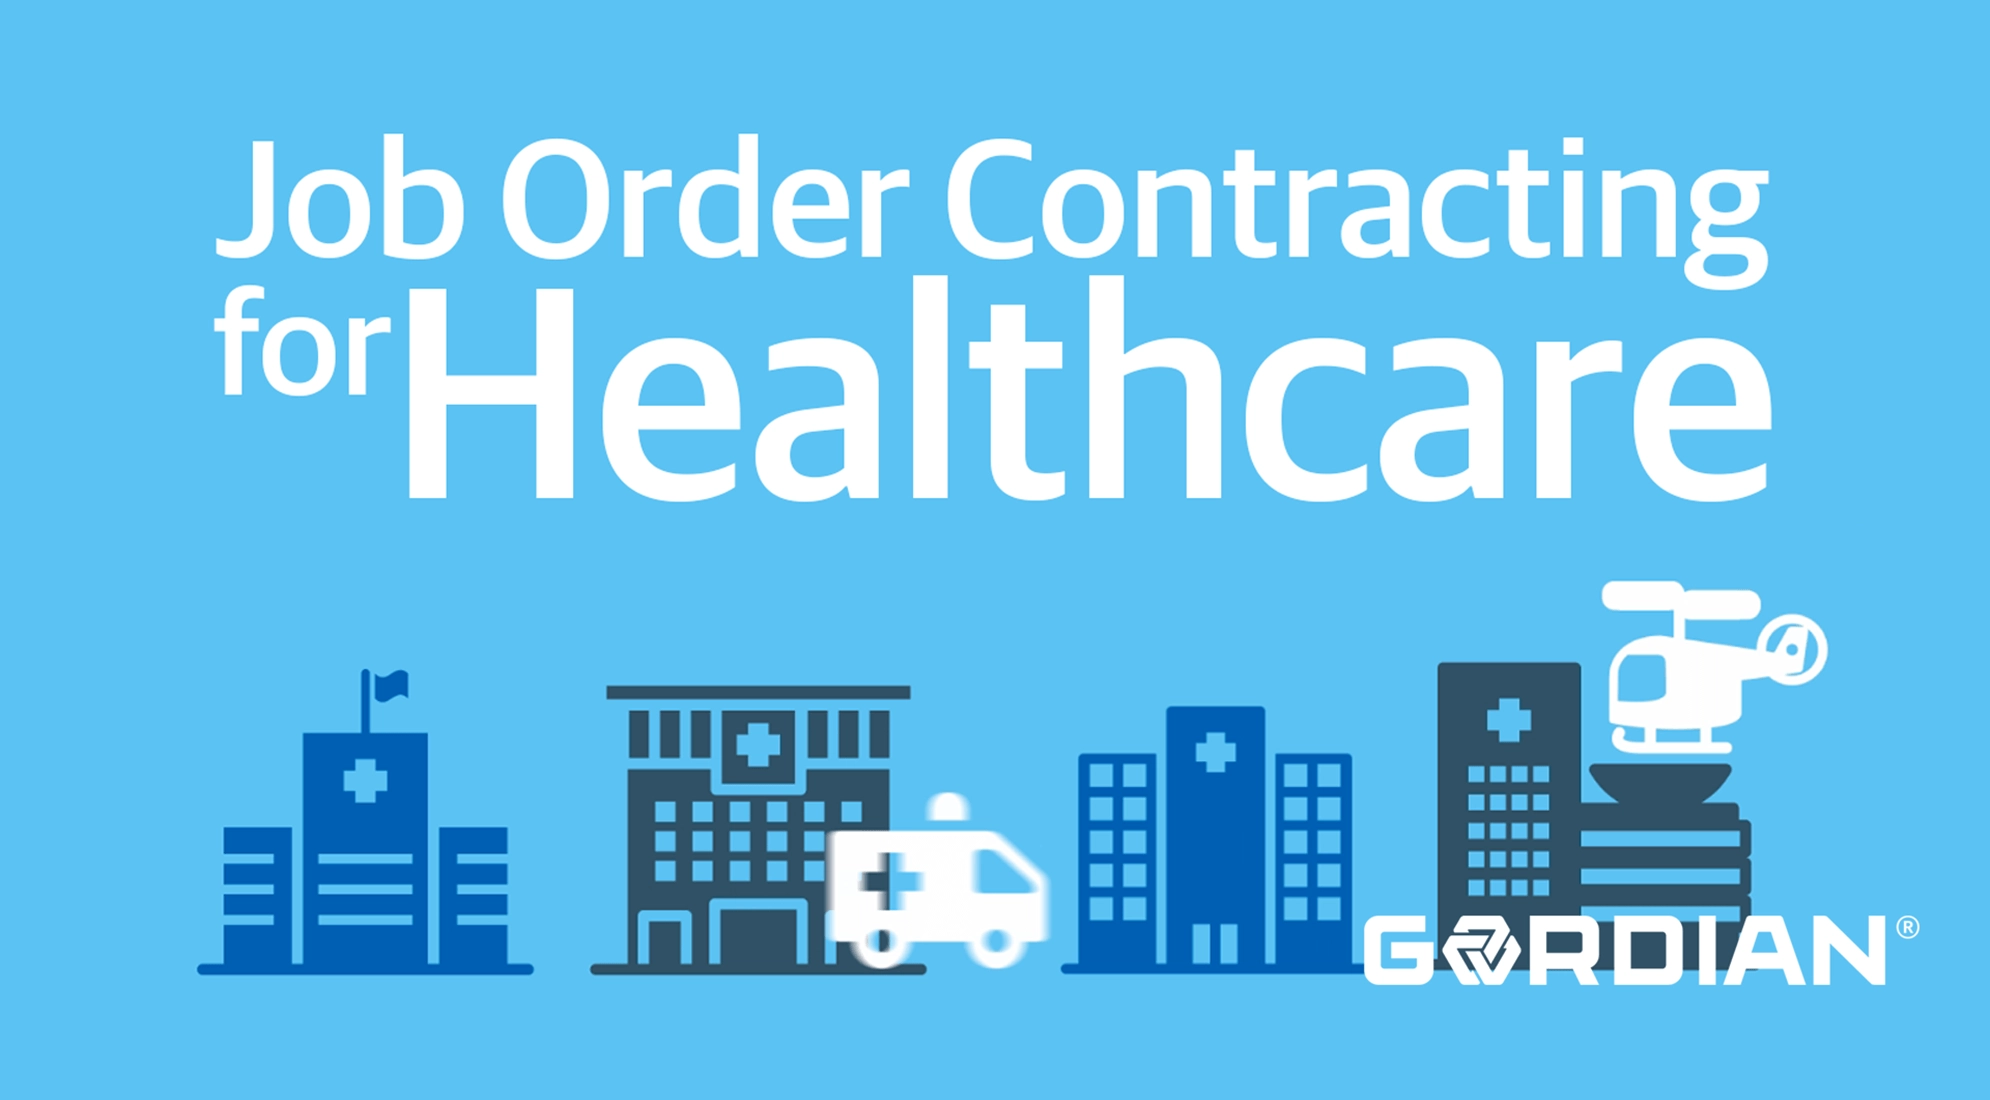 Benefits of Job Order Contracting for Healthcare 3